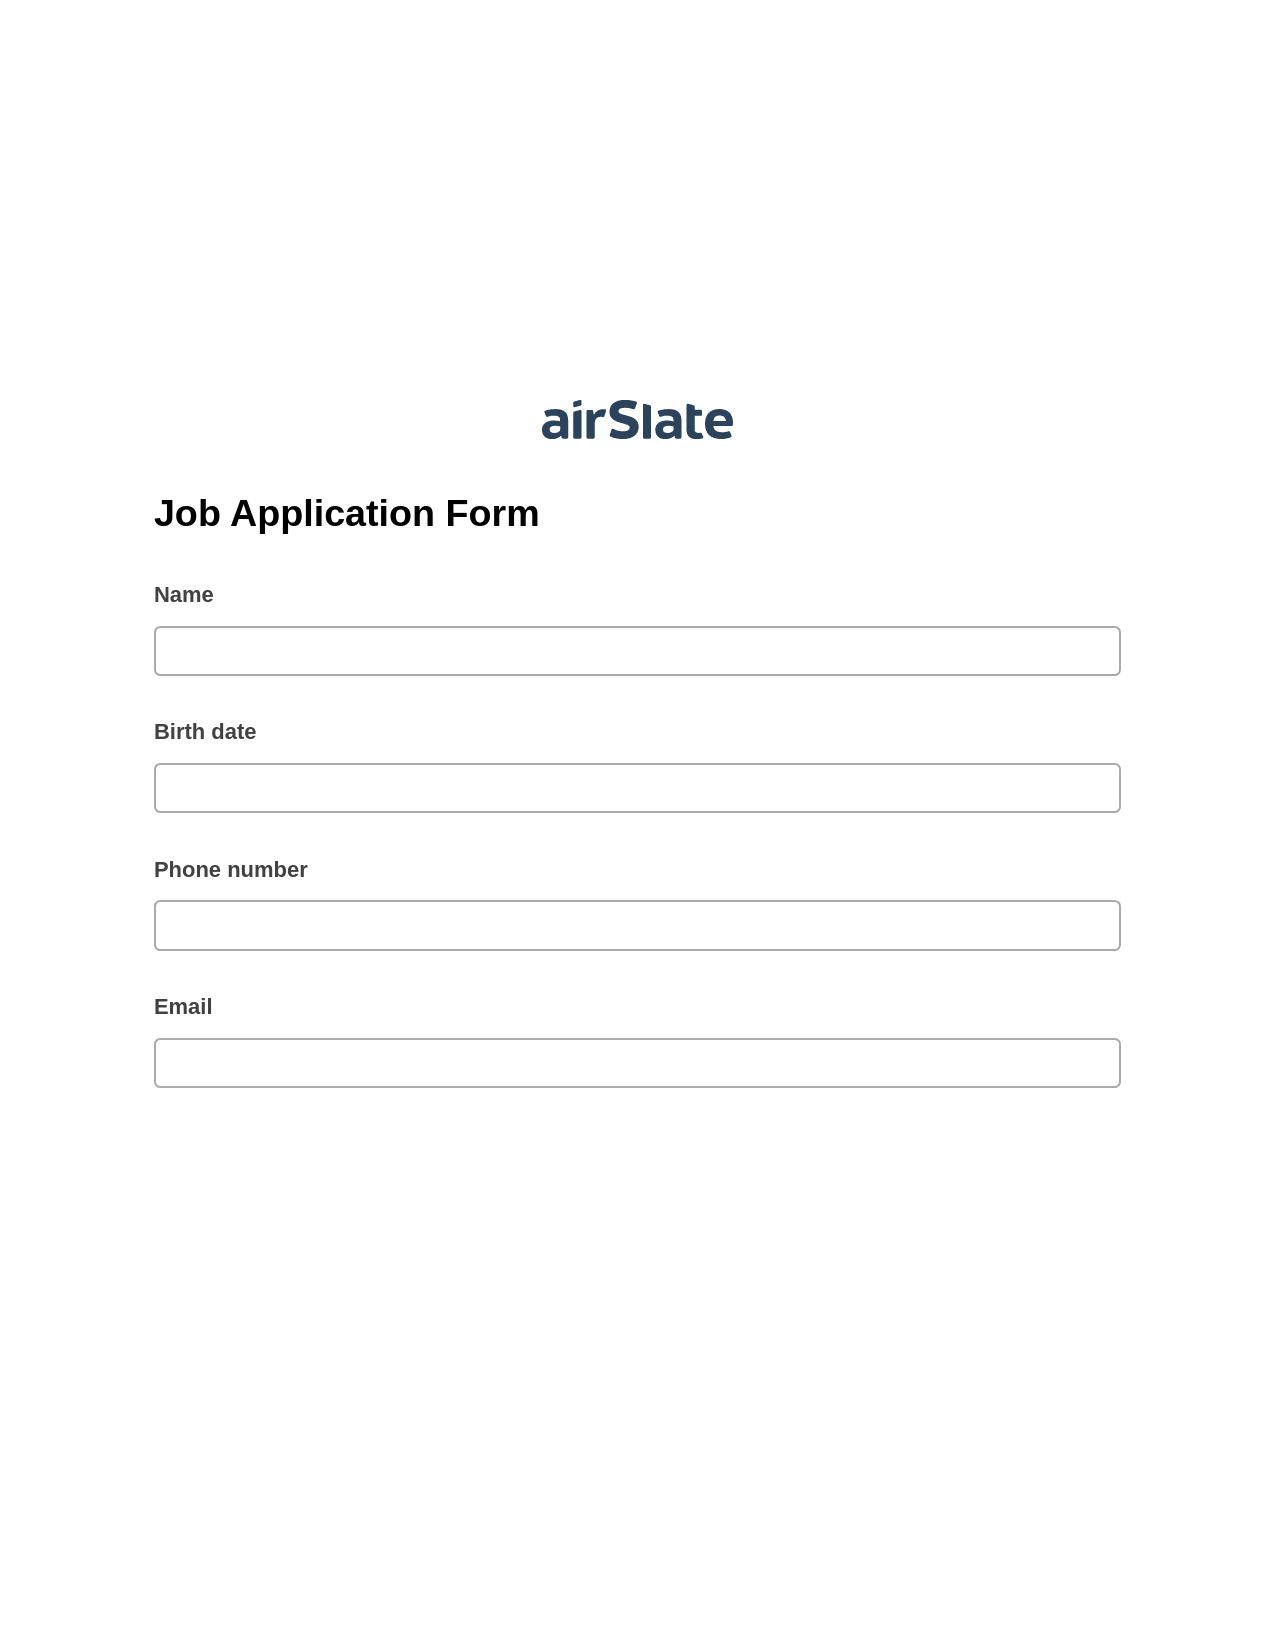 Job Application Form Pre-fill from CSV File Bot, Create slate bot, Export to Google Sheet Bot